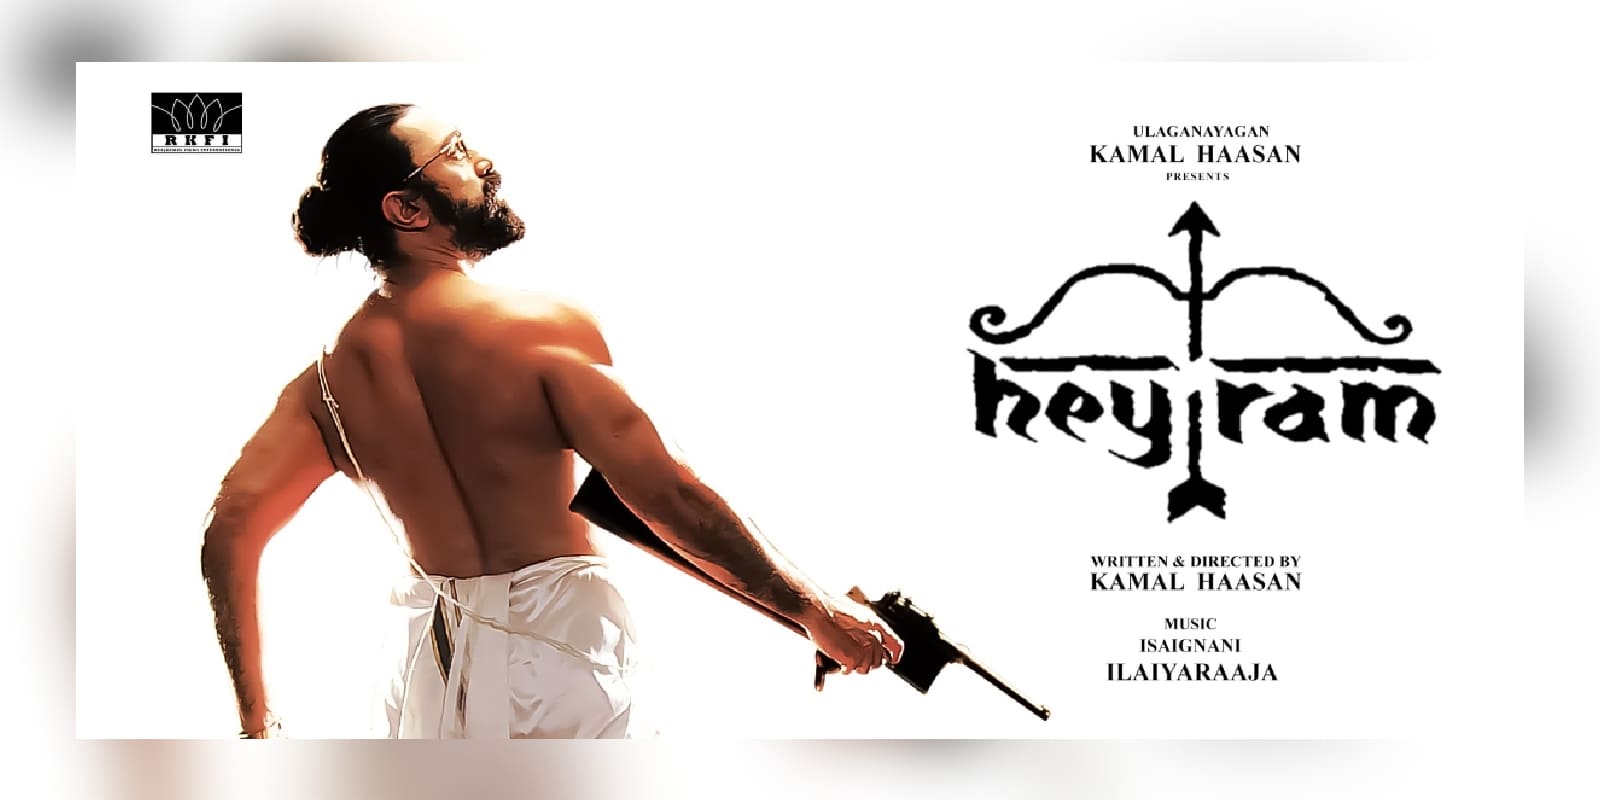 Hey Ram to be re-released in 12K resolution?